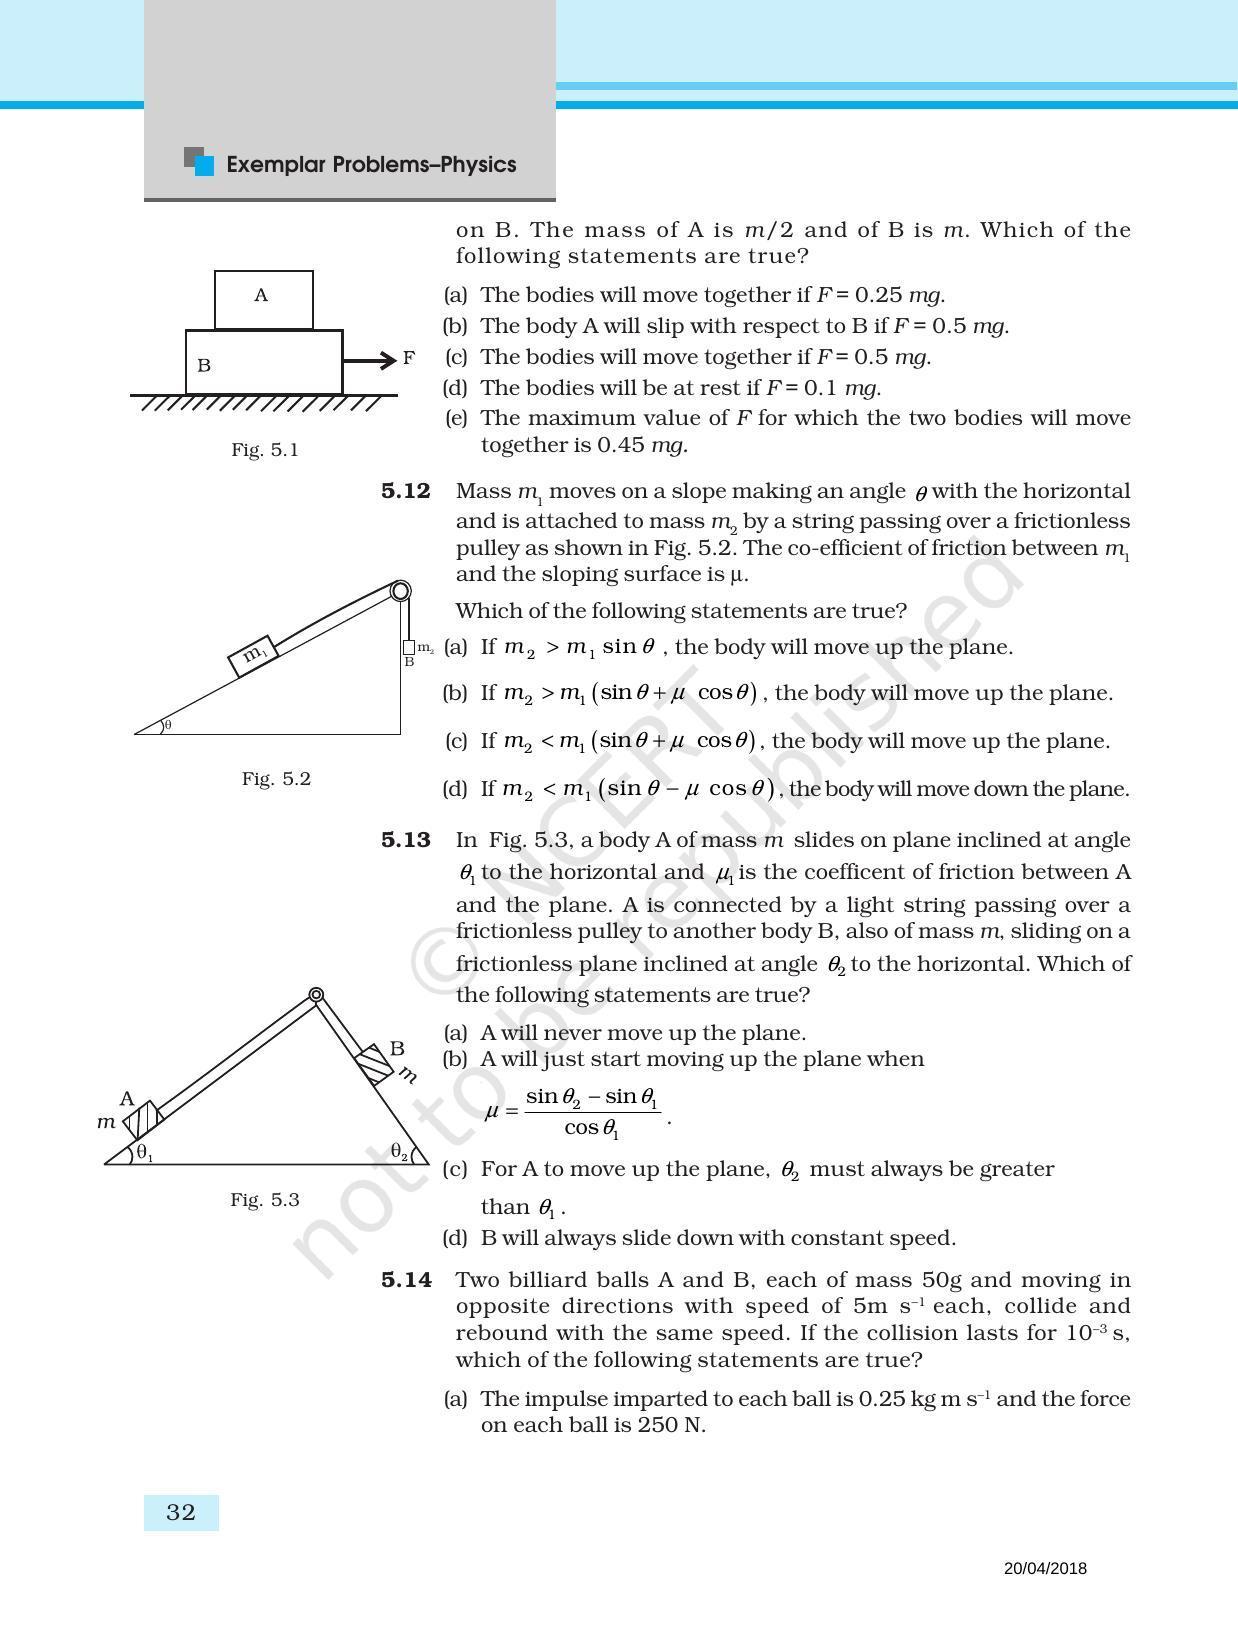 NCERT Exemplar Book for Class 11 Physics: Chapter 4 Laws of Motion - Page 4